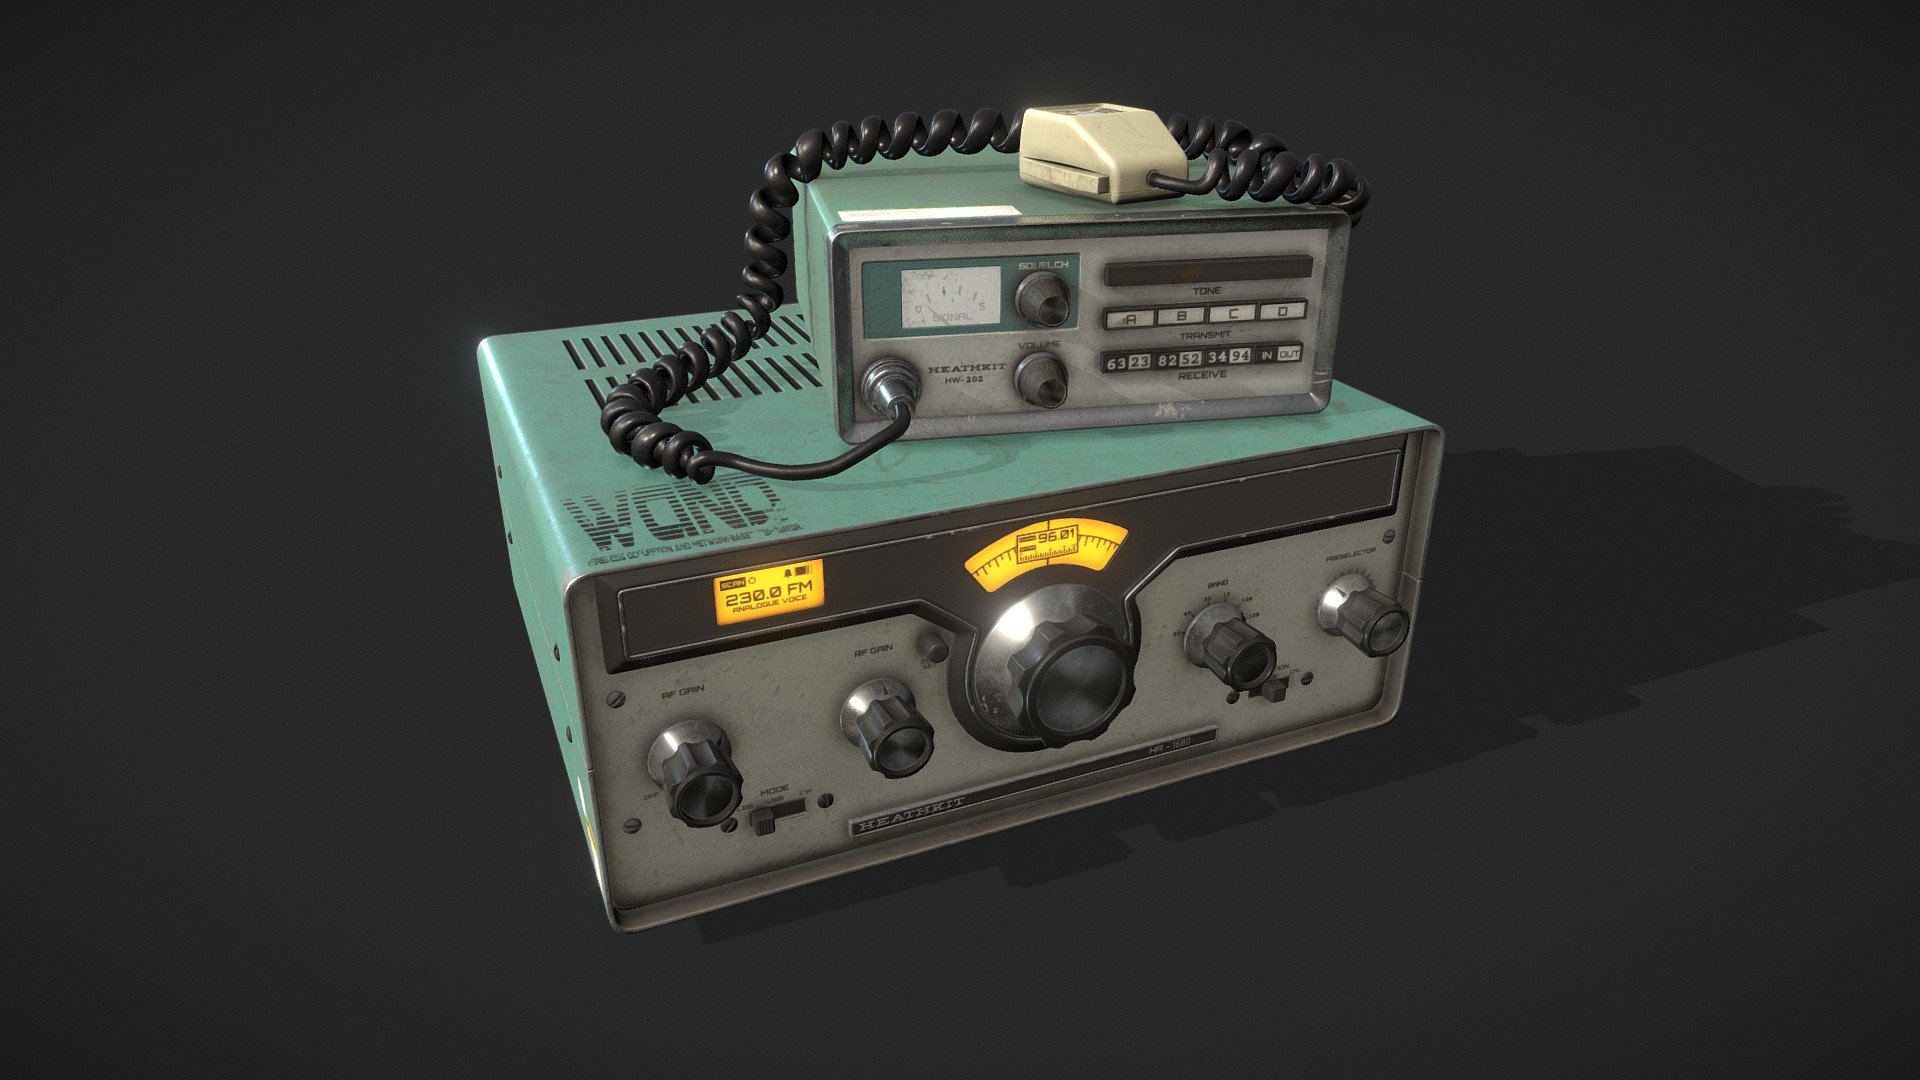 based on altered versions of the Heatkhit HW-202 and HR-1680 models, this radio kit consists of 2 separate devices that are meant for use in  a near-future setting mercenary hideout. 
The reason for the use of the more &lsquo;'oldschool'' tech is to remain more under the radar of the authorities, which is why they modded these old Heathkits.

made for my Game Asset Pipeline Course using a highpoly-lowpoly workflow - Oldschool Radio Kit - 3D model by Bryan van der Linden (@bryanvanderlinden) 3d model